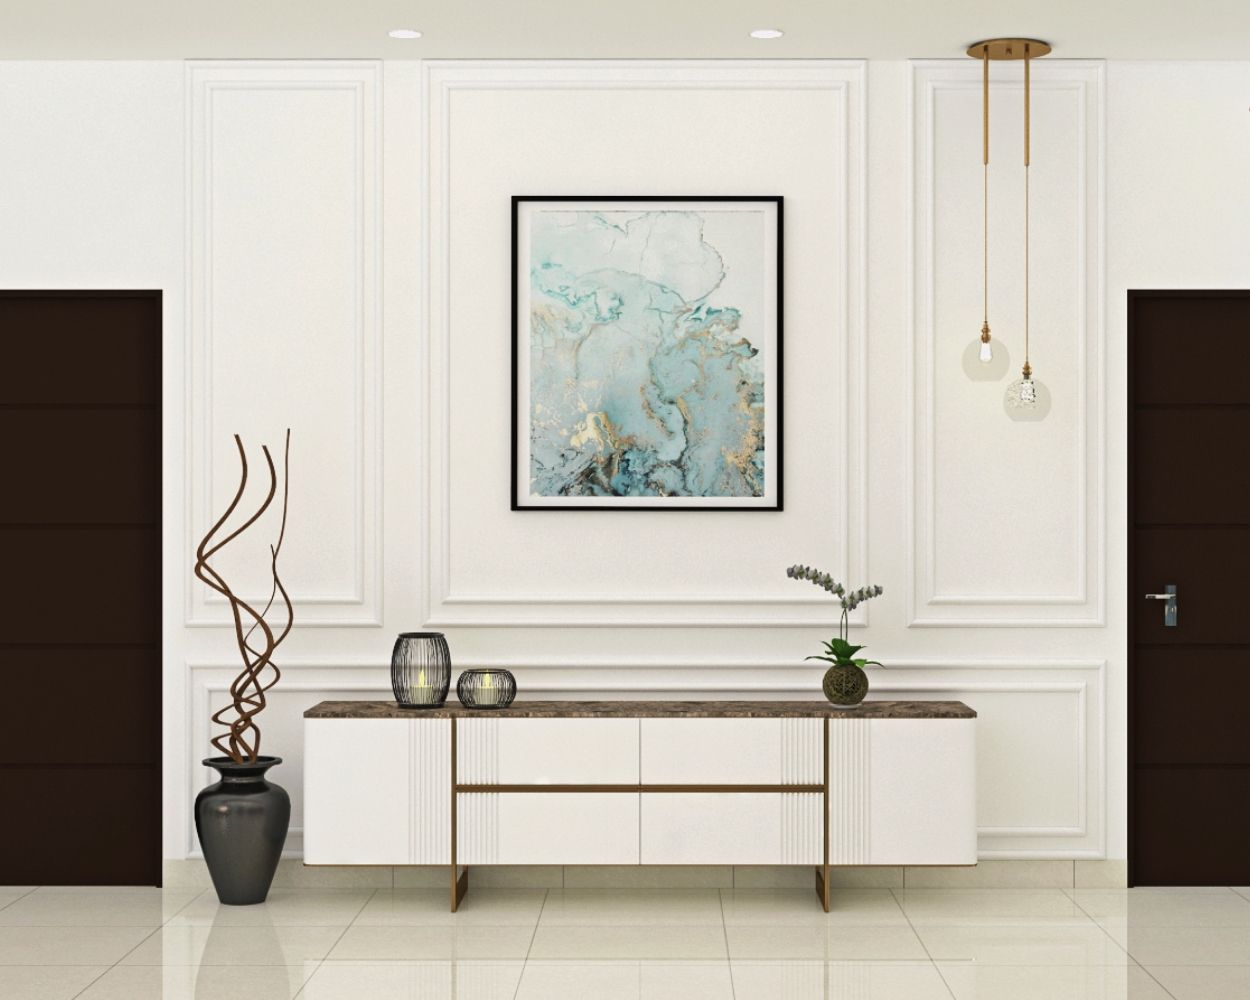 Contemporary Frosty White And Brown Foyer Design With Abstract Wall Painting